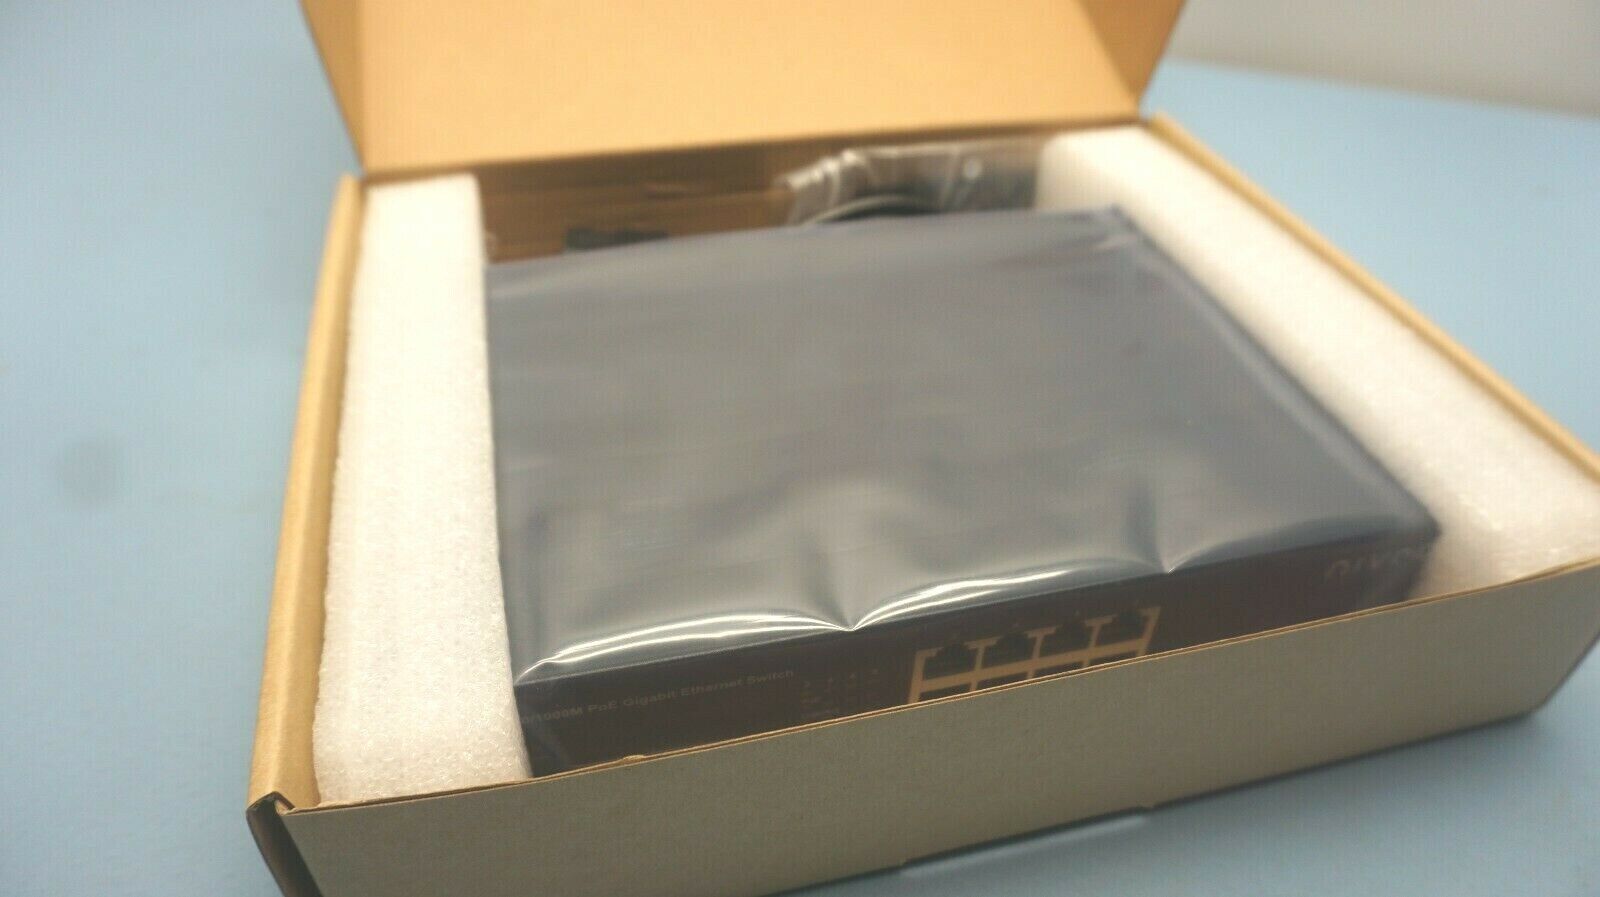 Niveo NGSE8H 8-Port 10/100/1000 PoE+ Gigabit Ethernet Switch - New in Box (74B)